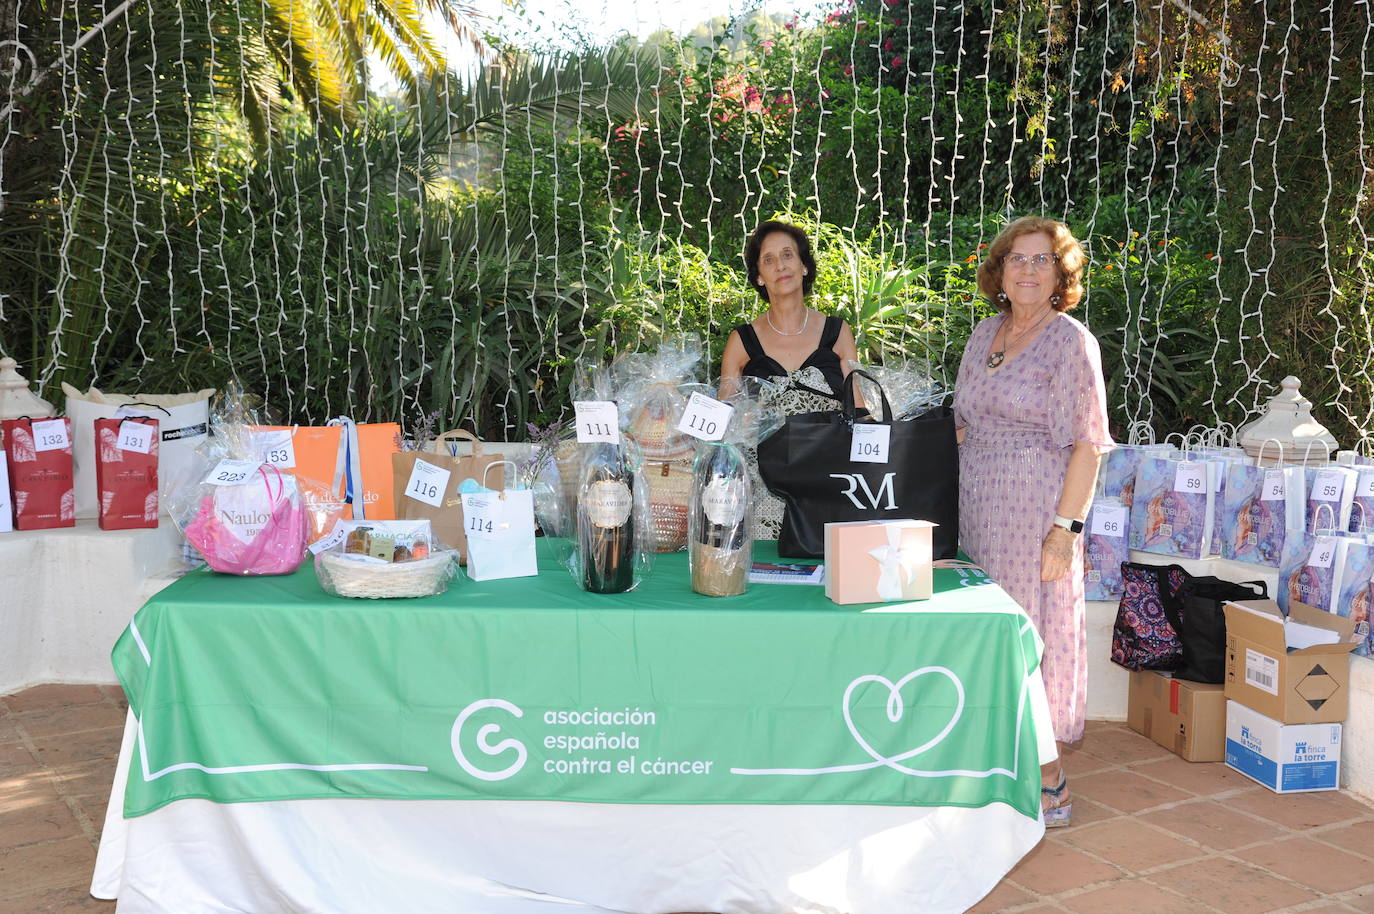 The gala dinner of the Asociación Española Contra el Cáncer de Marbella has returned in style, bringing together more than 500 people at Finca de La Concepción to support the work of this group that cares for patients suffering from this disease and their families